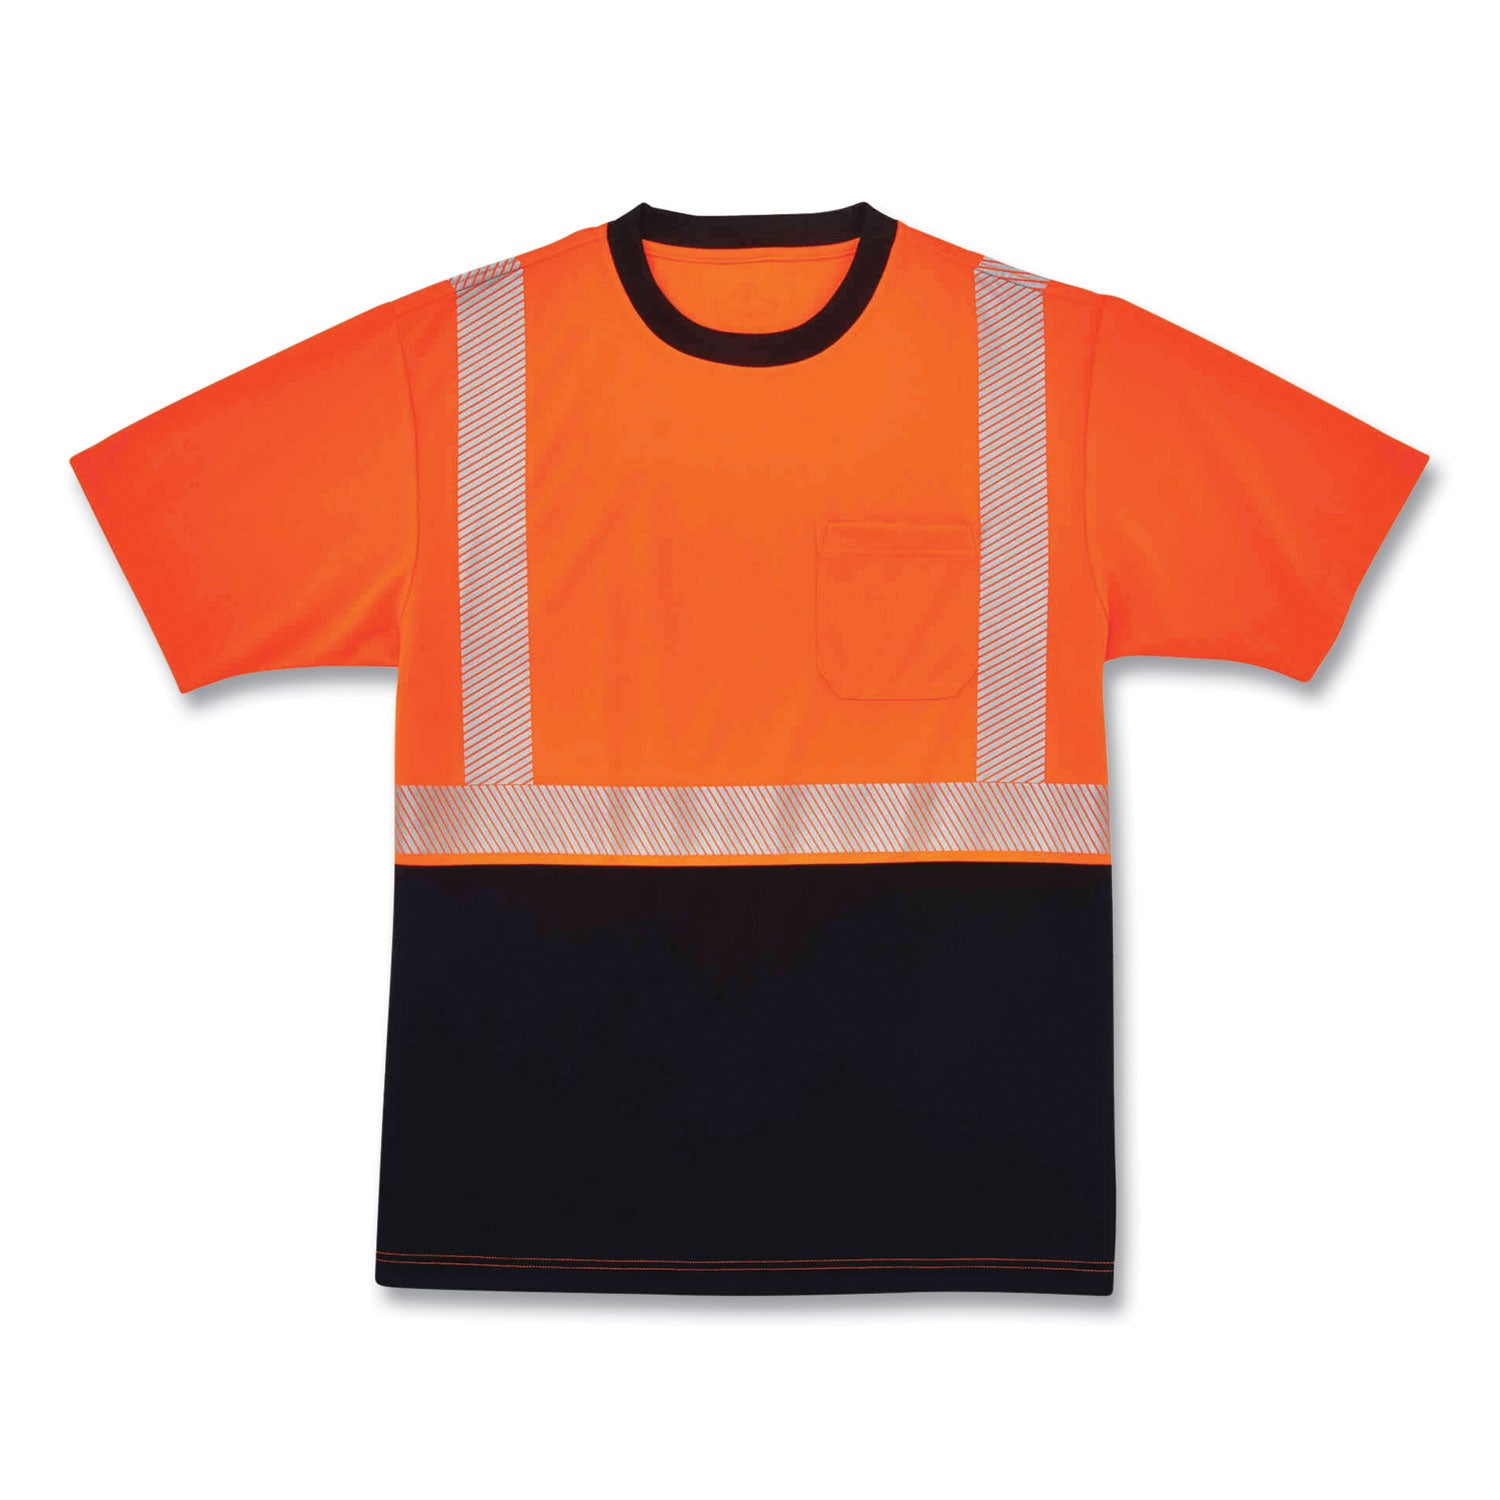 glowear-8280bk-class-2-performance-t-shirt-with-black-bottom-polyester-4x-large-orange-ships-in-1-3-business-days_ego22588 - 1